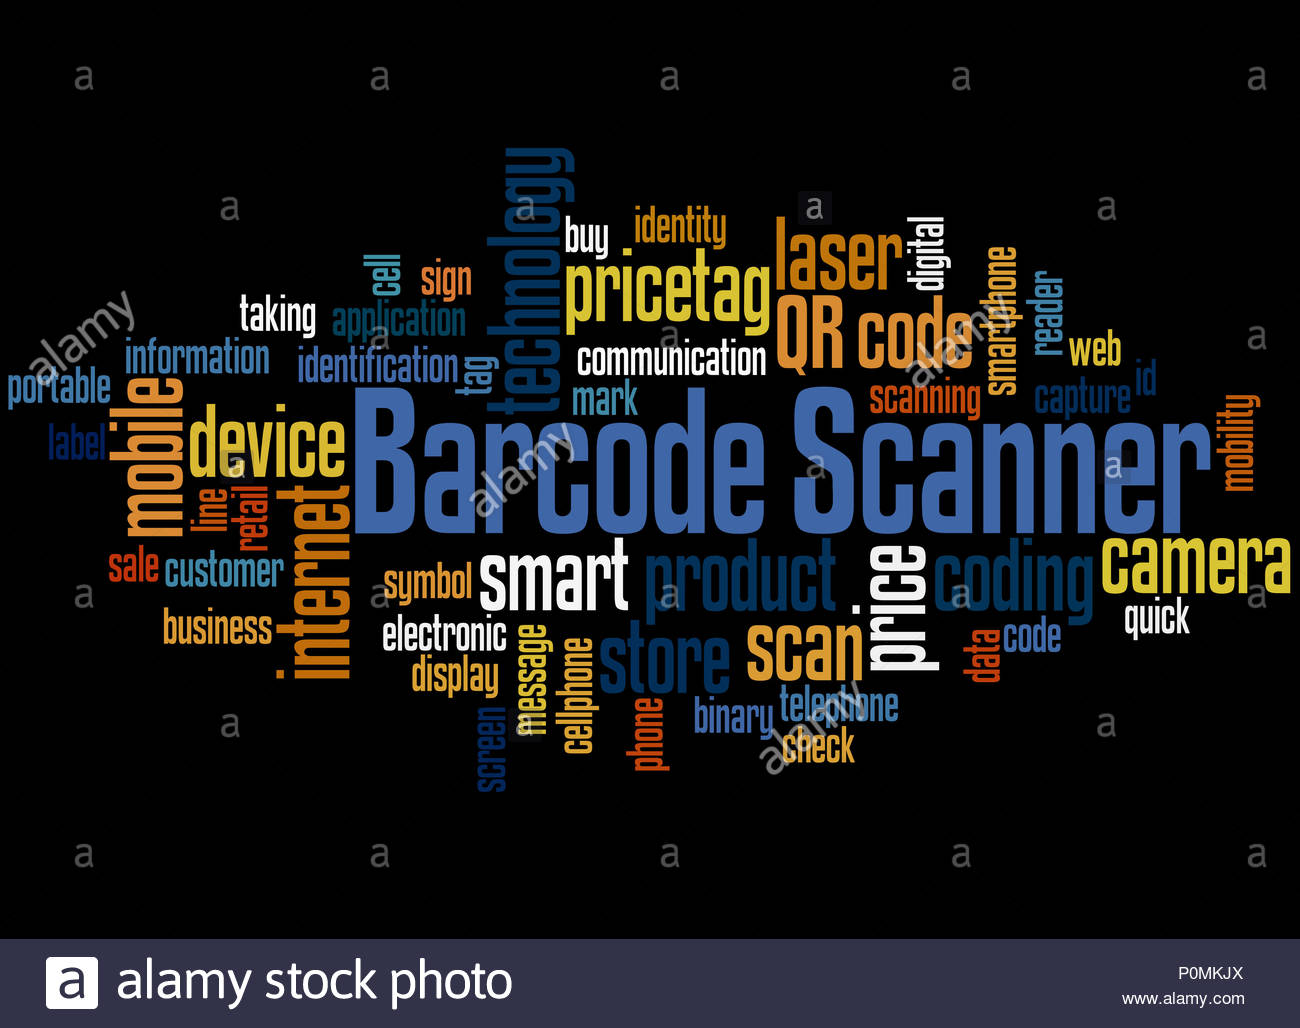 Barcode Scanner Word Cloud Concept On Black Background Stock Photo